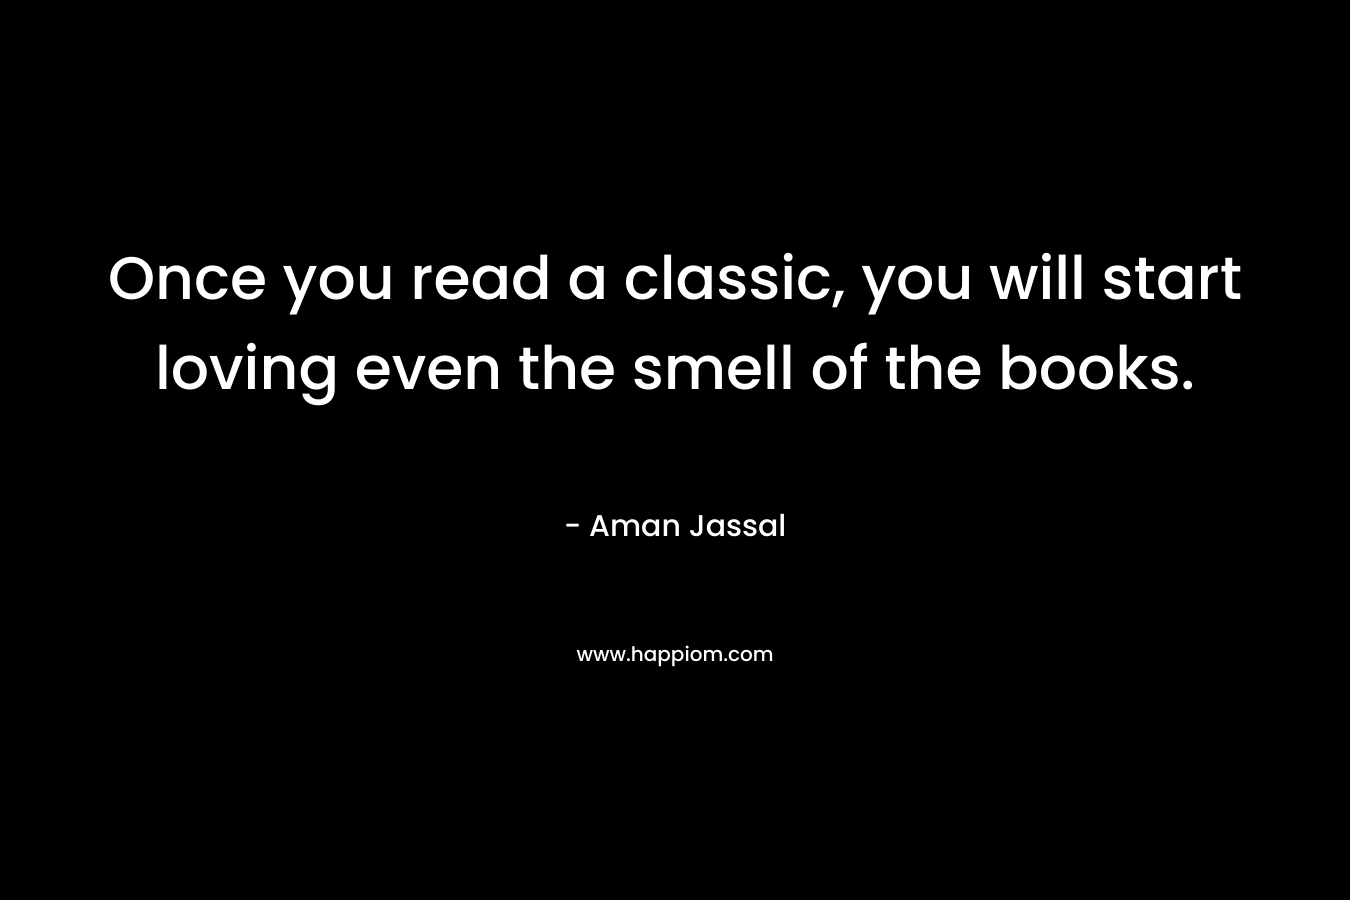 Once you read a classic, you will start loving even the smell of the books.